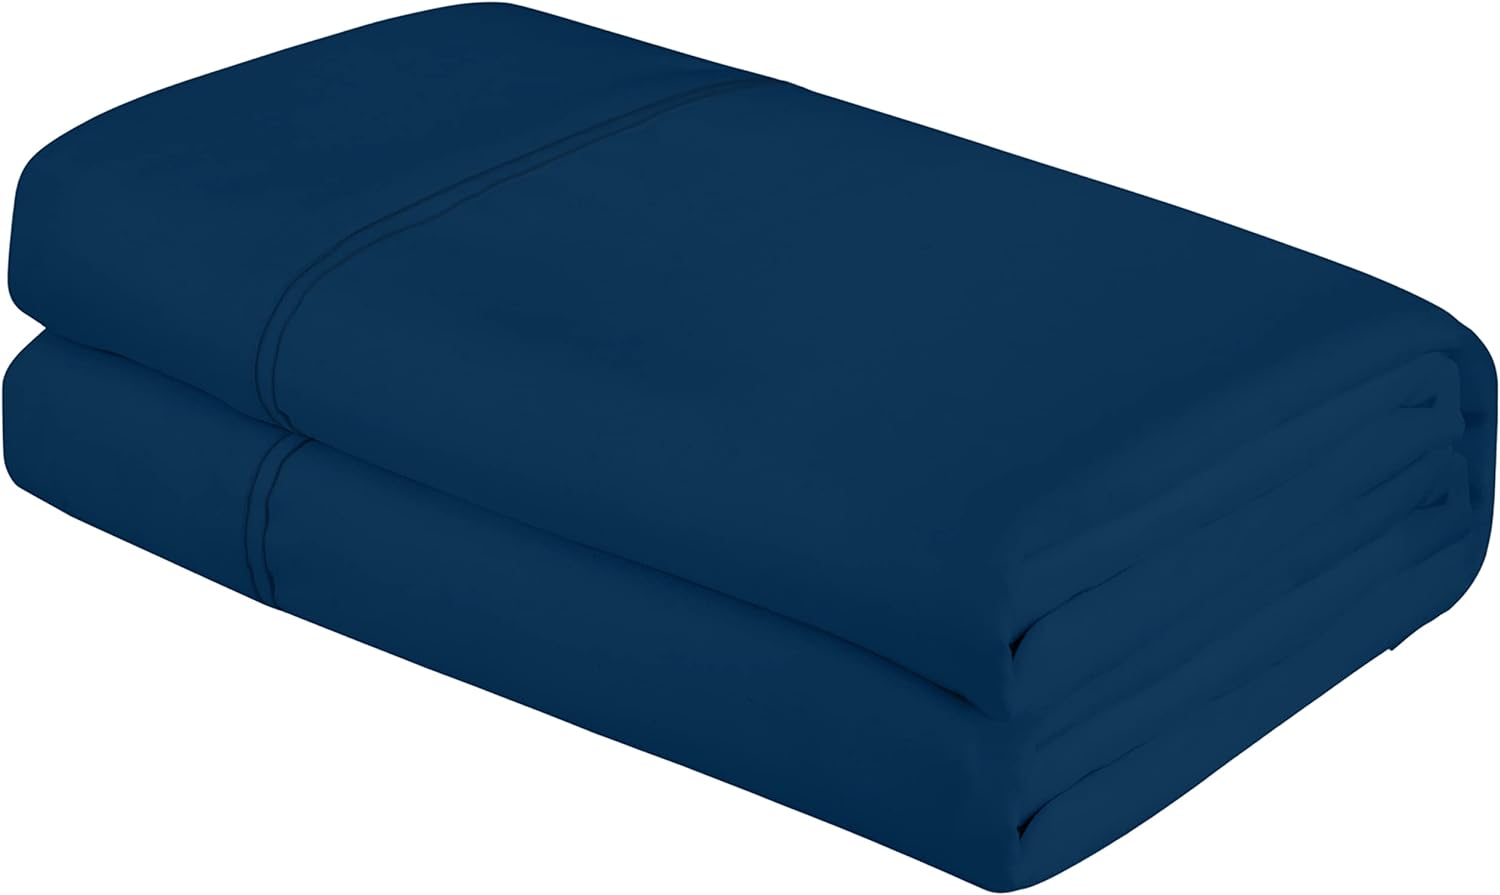 Royale Linens King Size Flat Sheet Only - Brushed 1800 Microfiber - Ultra Soft & Breathable - Wrinkle & Stain Resistant - Hotel Quality Flat Sheet Sold Separately - Top Sheet for Bed - (King, Navy)